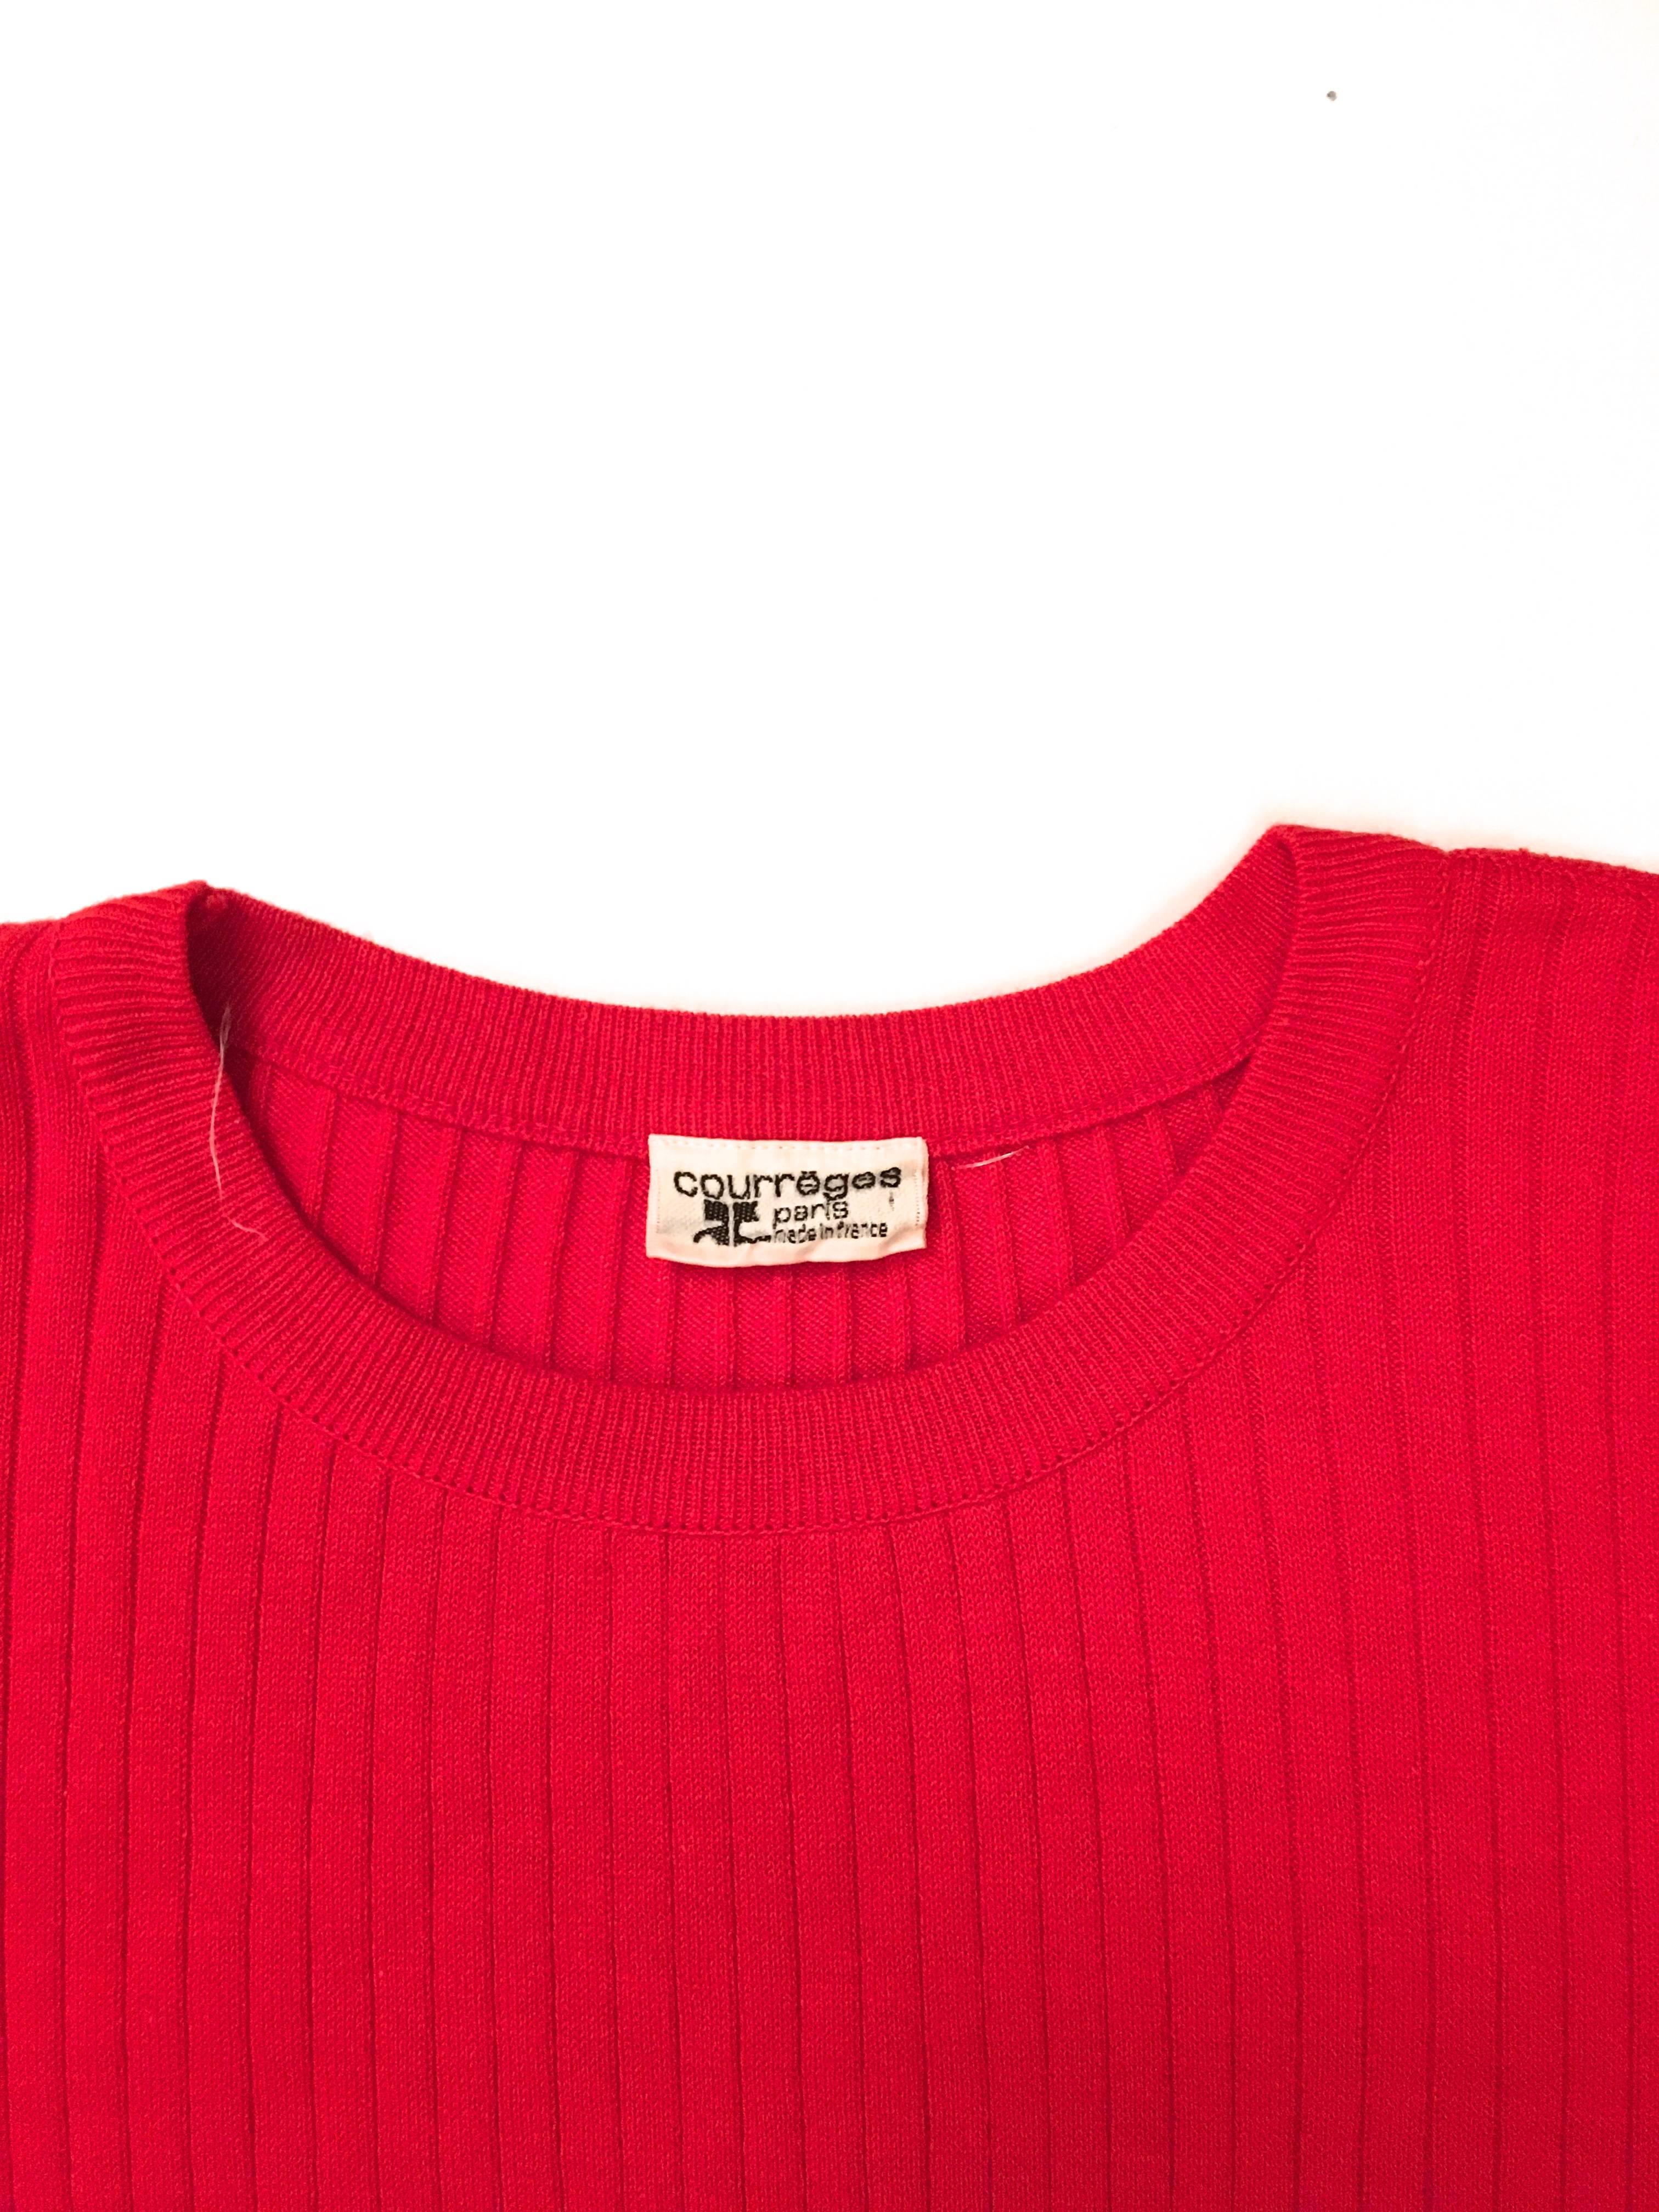 Rare Courreges Red Cardigan Sweater Set - 1970's For Sale 4